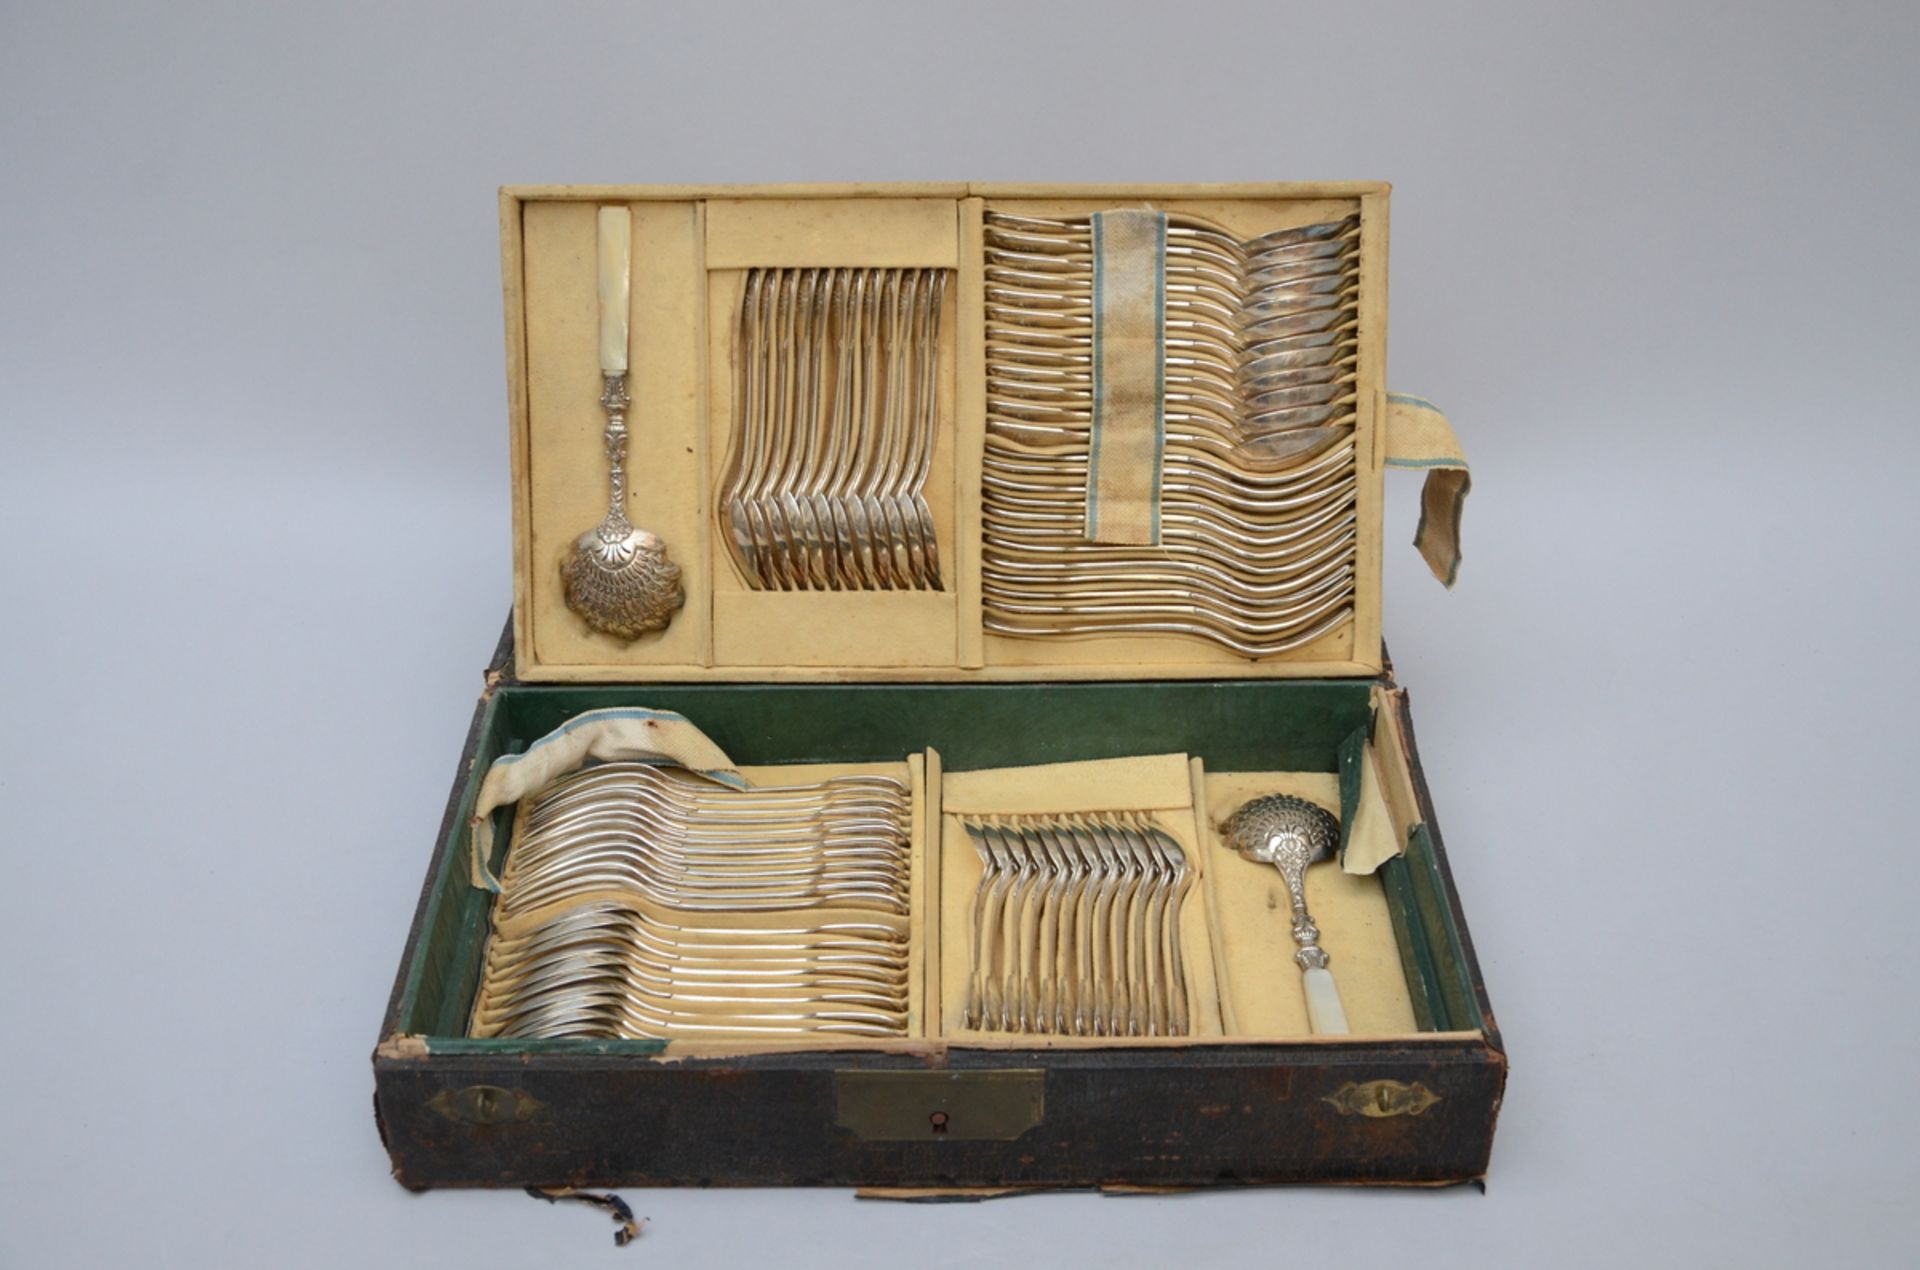 A case with 72 silver pieces of dessert cutlery, 19th century - Image 2 of 5